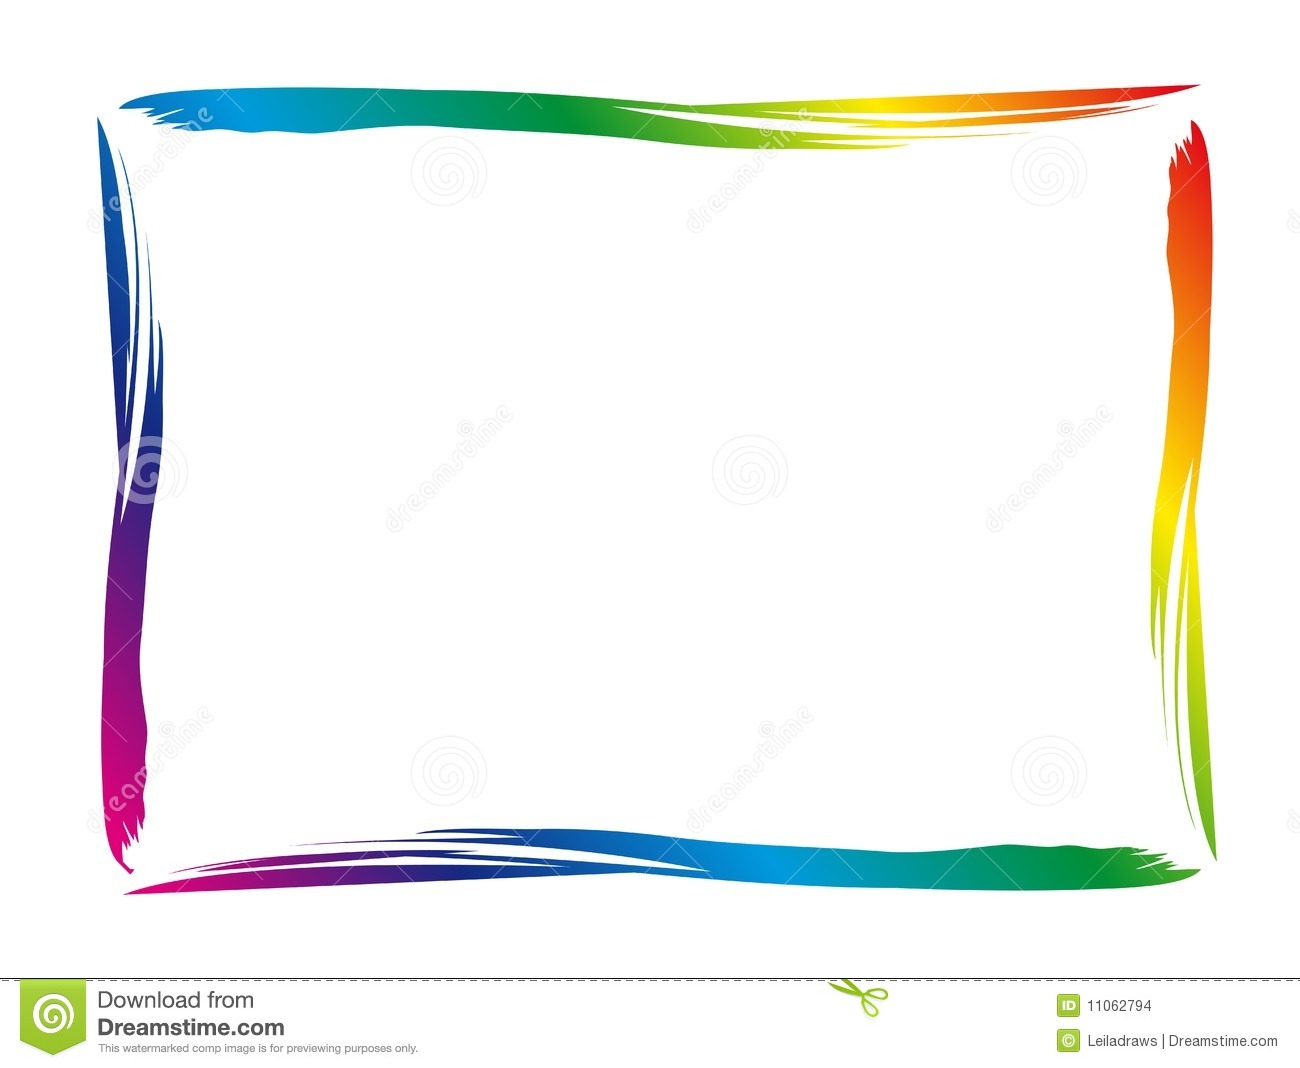 Colorful Border Stock Images   Image  11062794